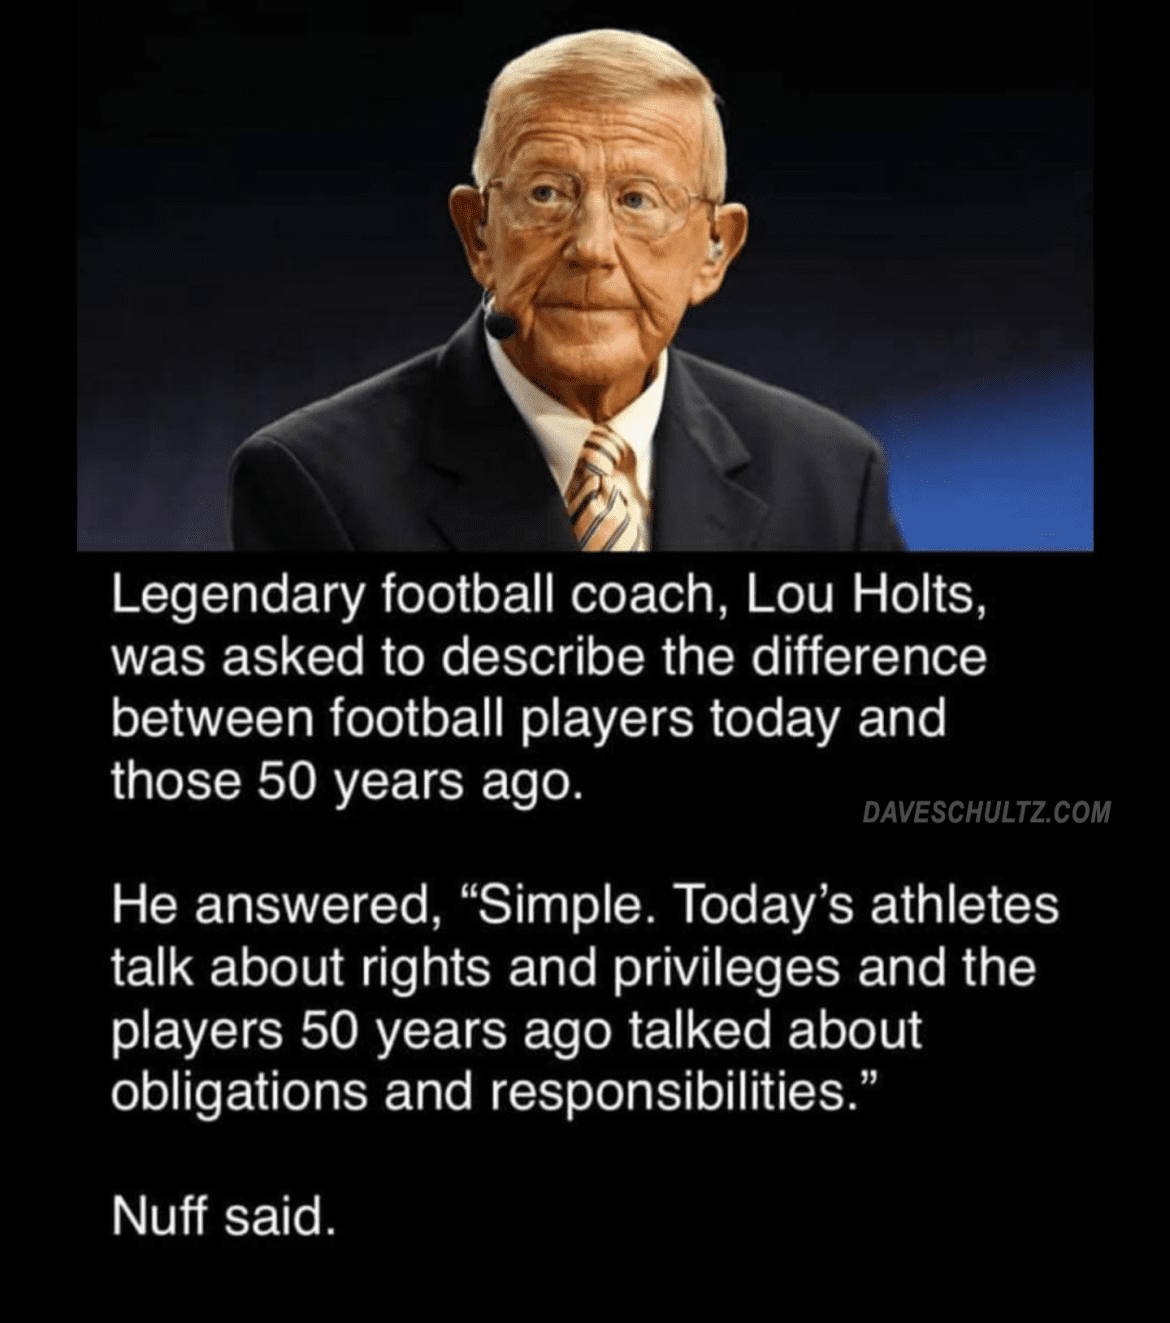 Lou Holtz on the Evolution of Players